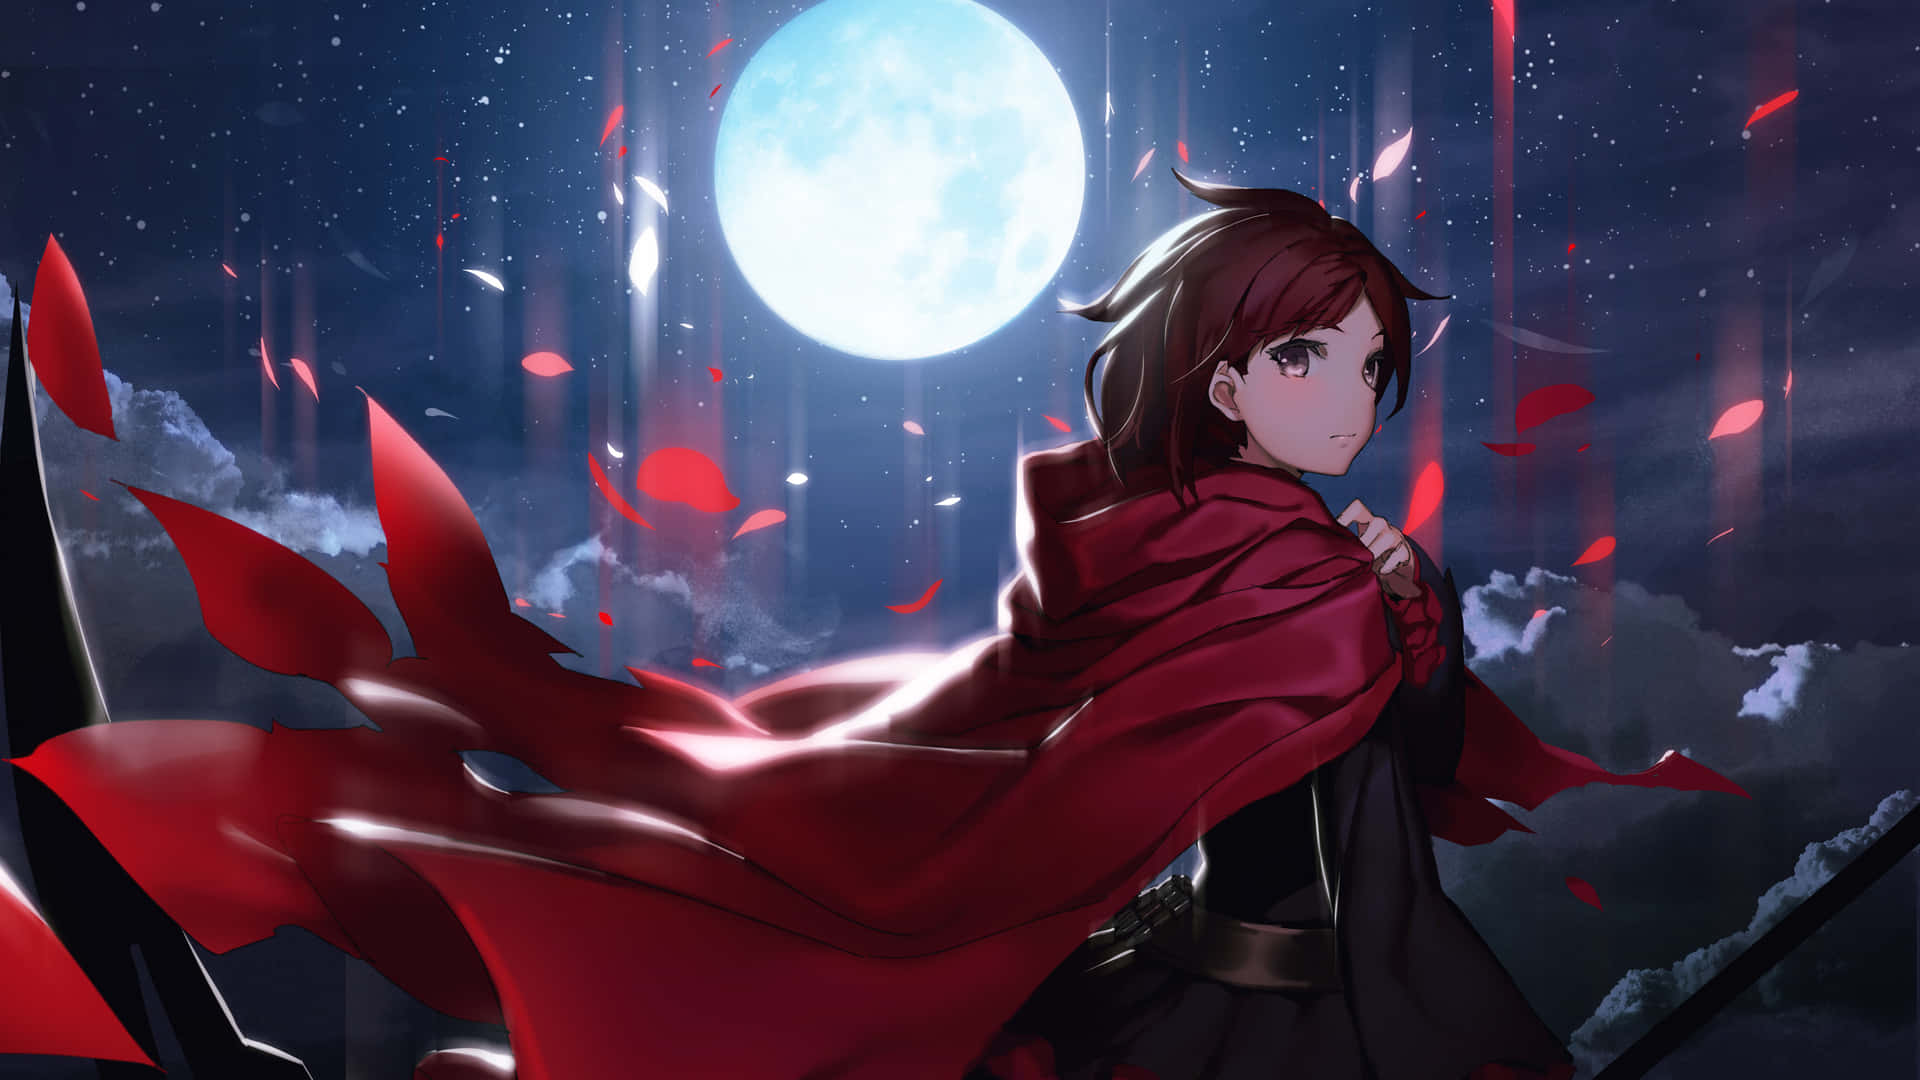 Team RWBY - Ruby, Weiss, Blake, and Yang - united against the forces of evil